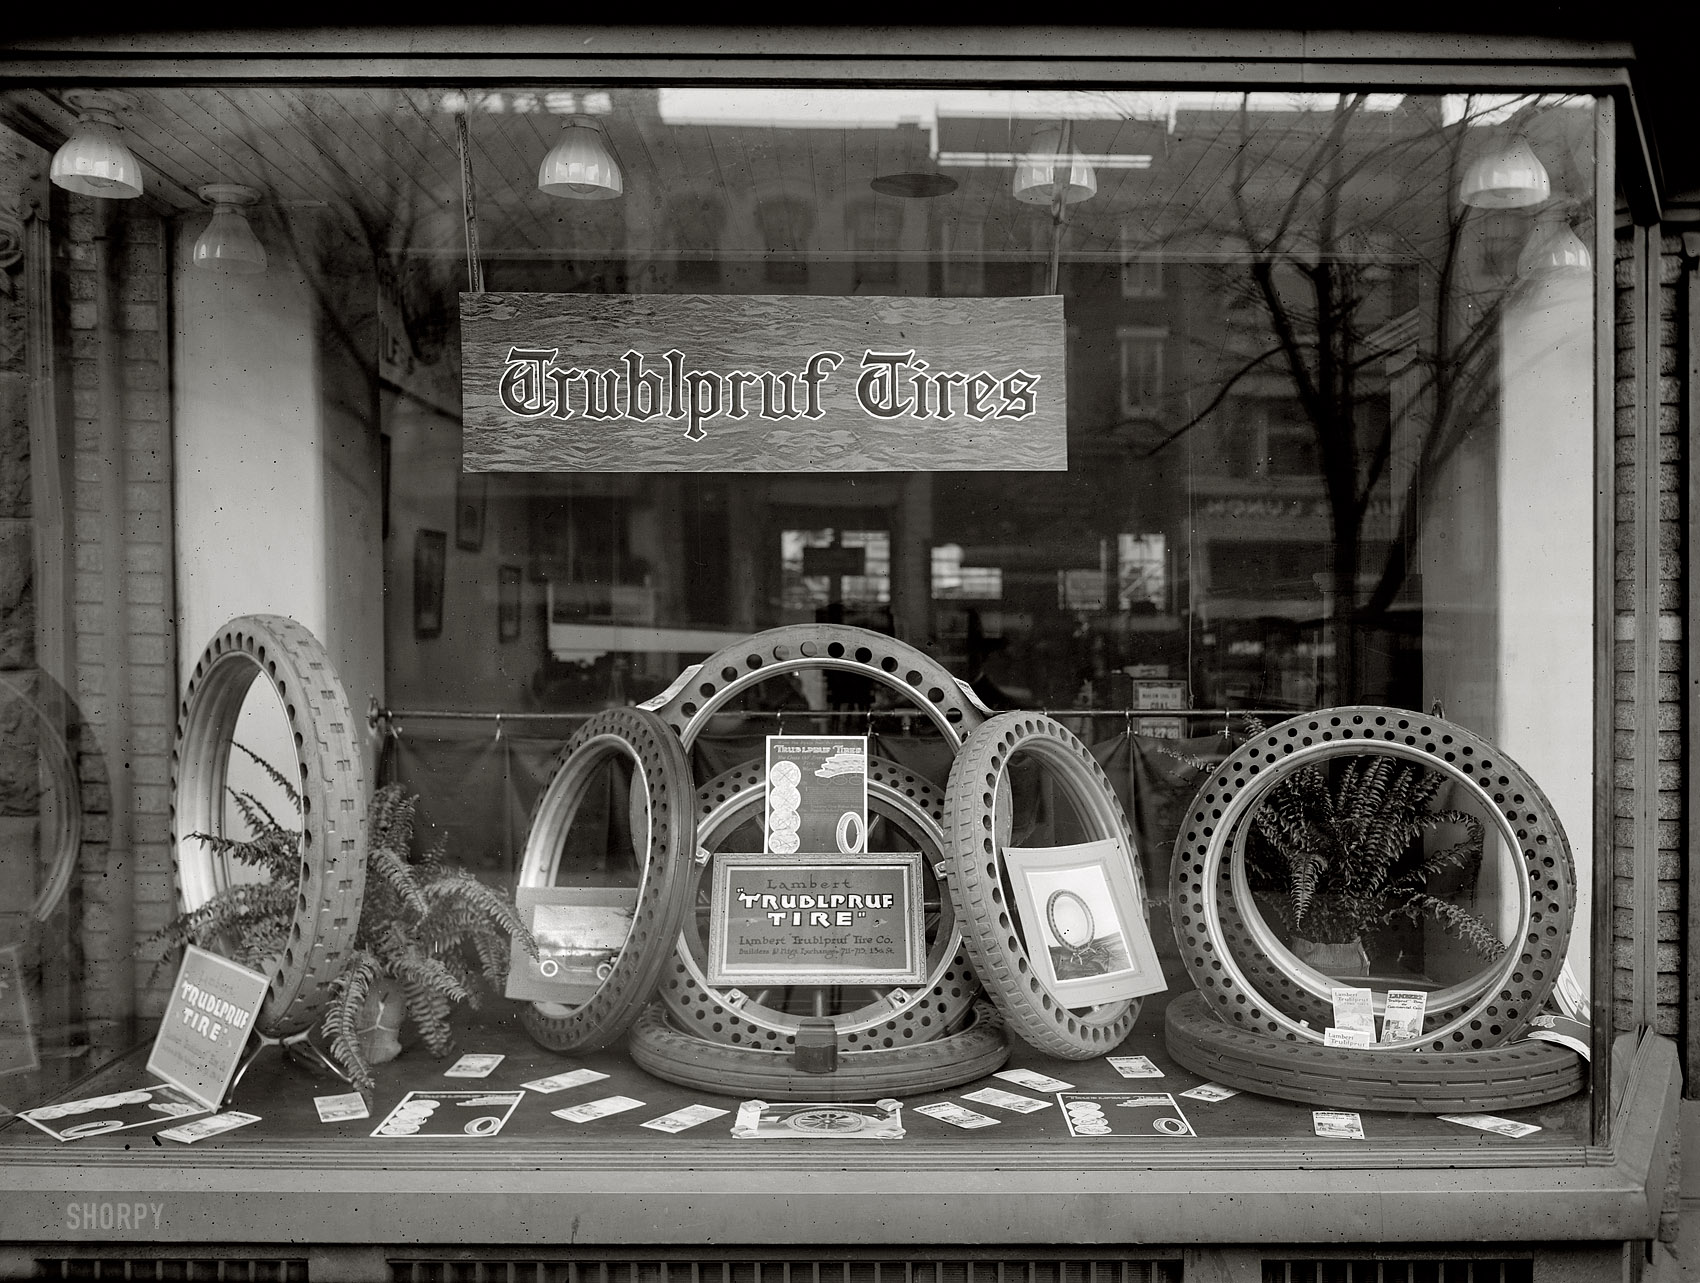 Washington, D.C., circa 1920. "Draper window." A display for Lambert Trublpruf solid rubber tires, a business owned by Charles W. Draper. We've seen these earlier at Shorpy on a few trucks. National Photo glass negative. View full size.